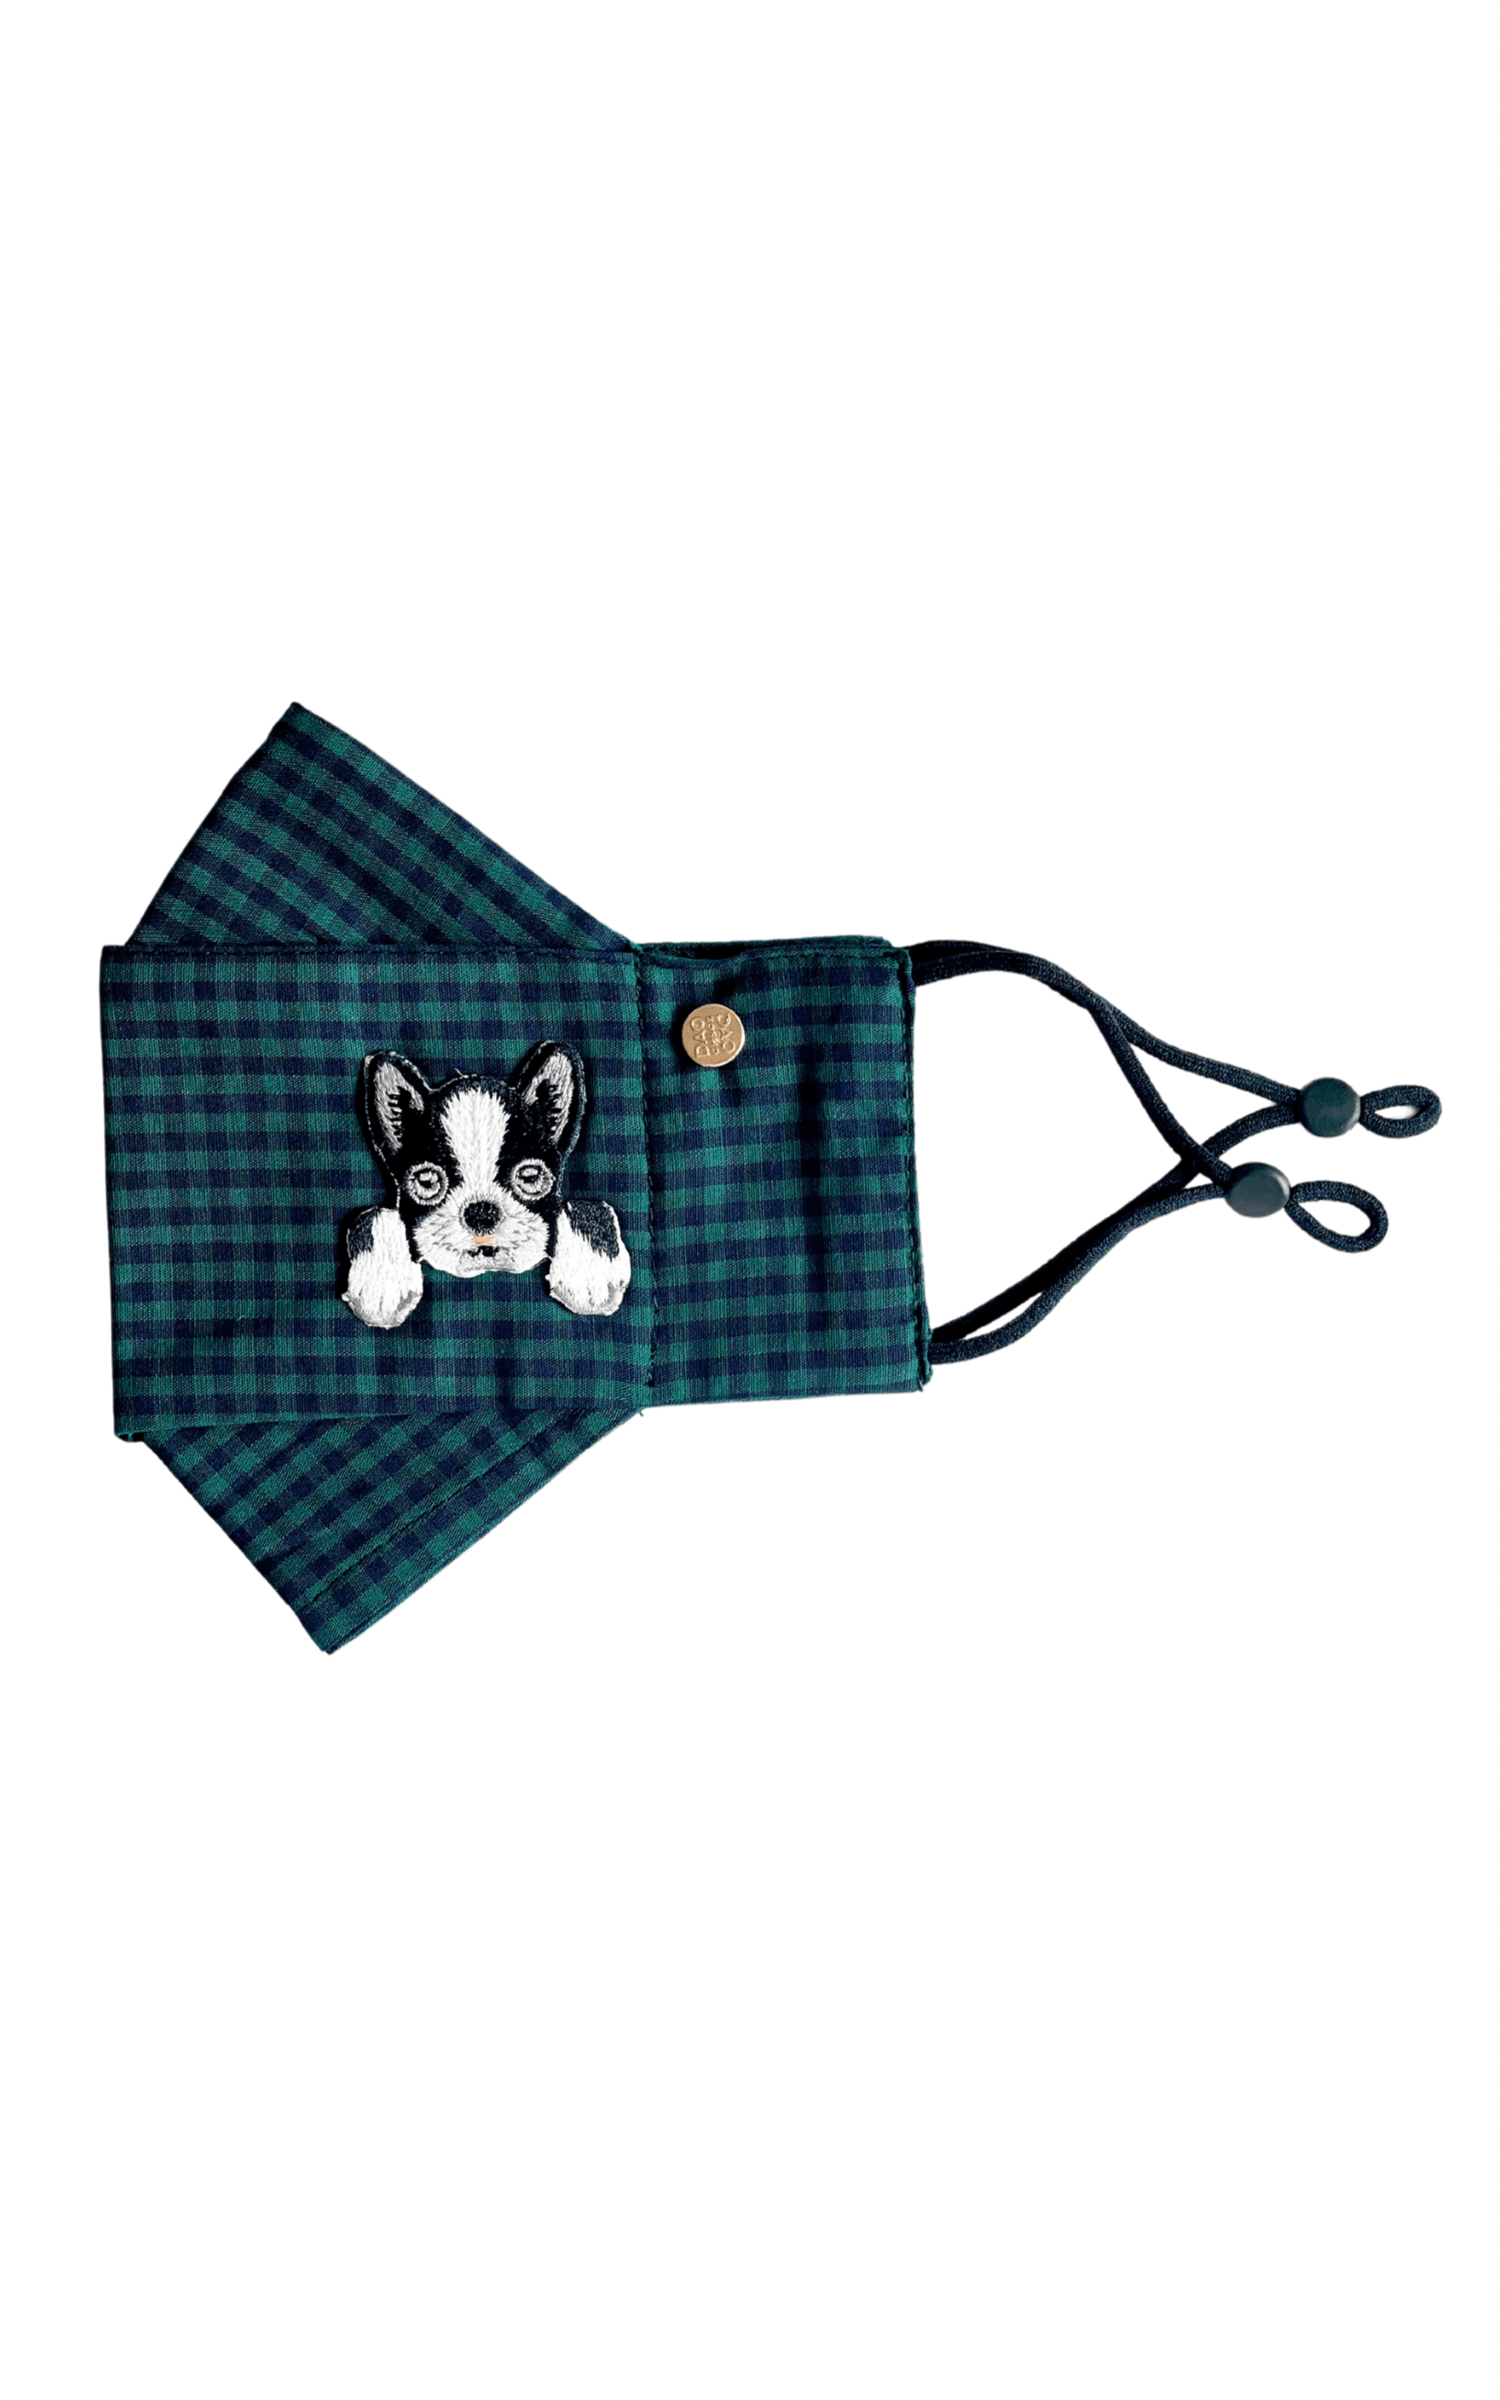 Box Pleated Face Masks Frenchie Green Gingham Box Pleat Mask ( w Filter Pocket) - Chloe Dao